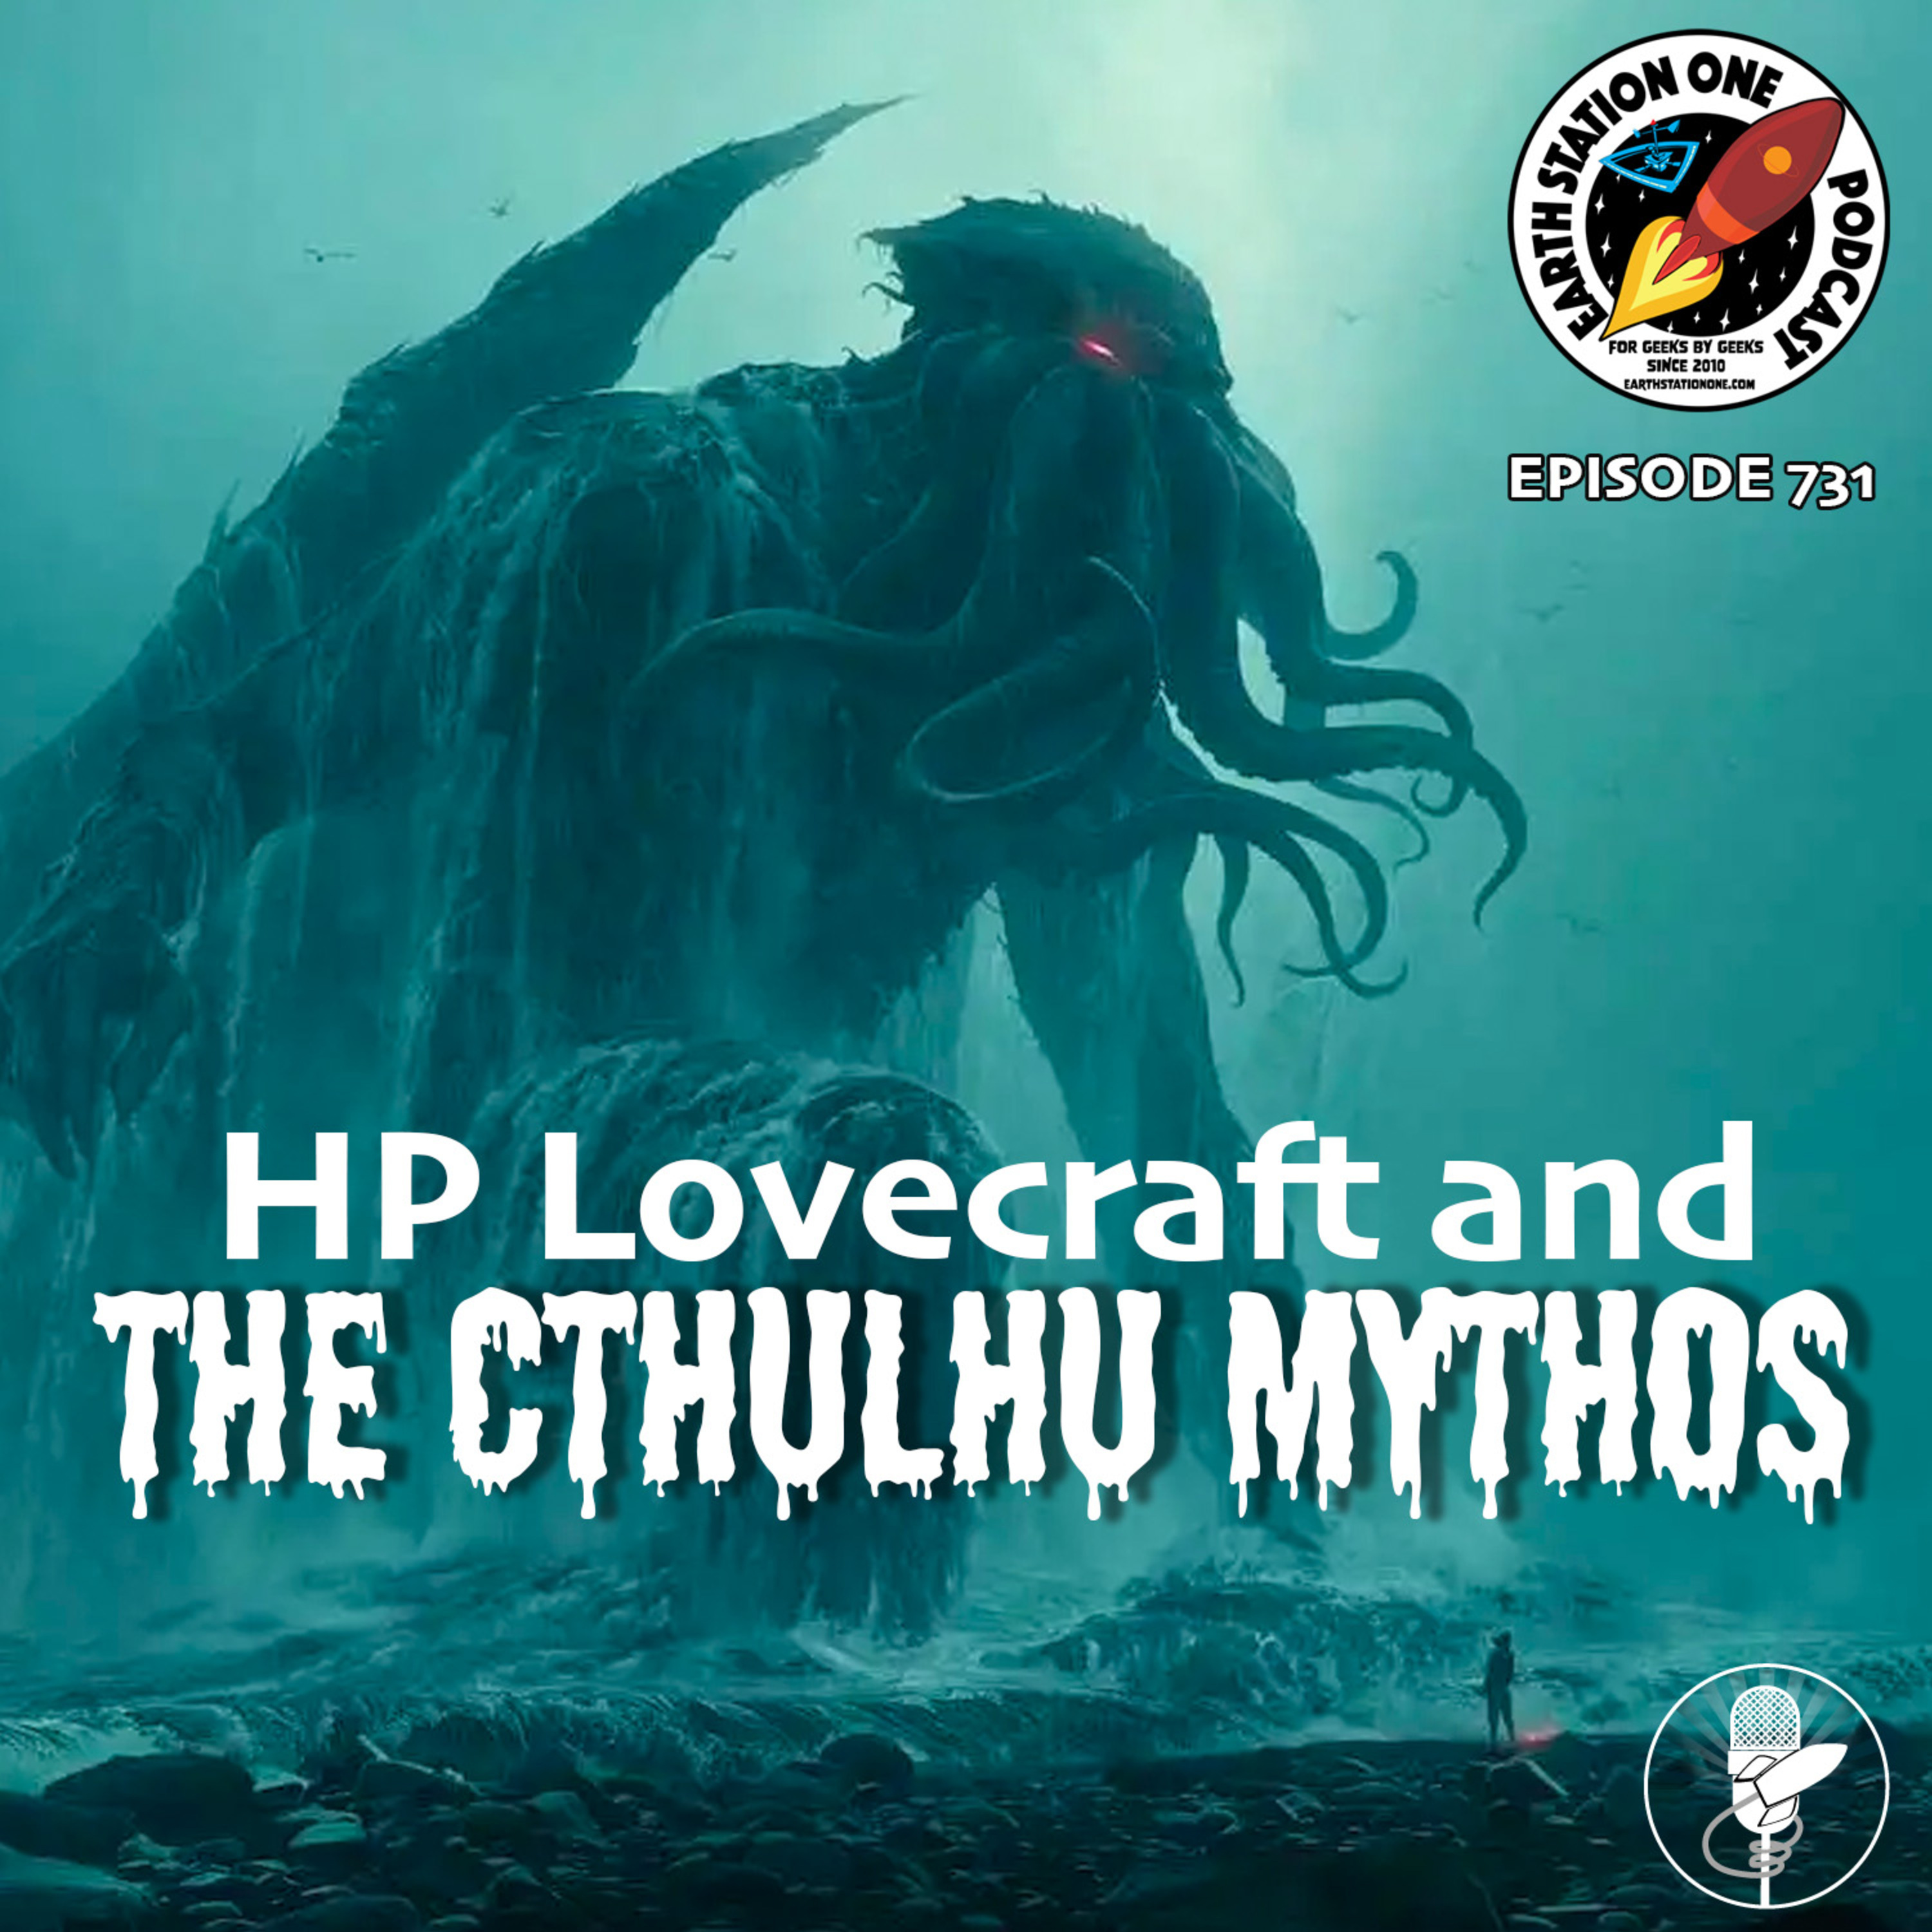 HP Lovecraft and the Cthulhu Mythos